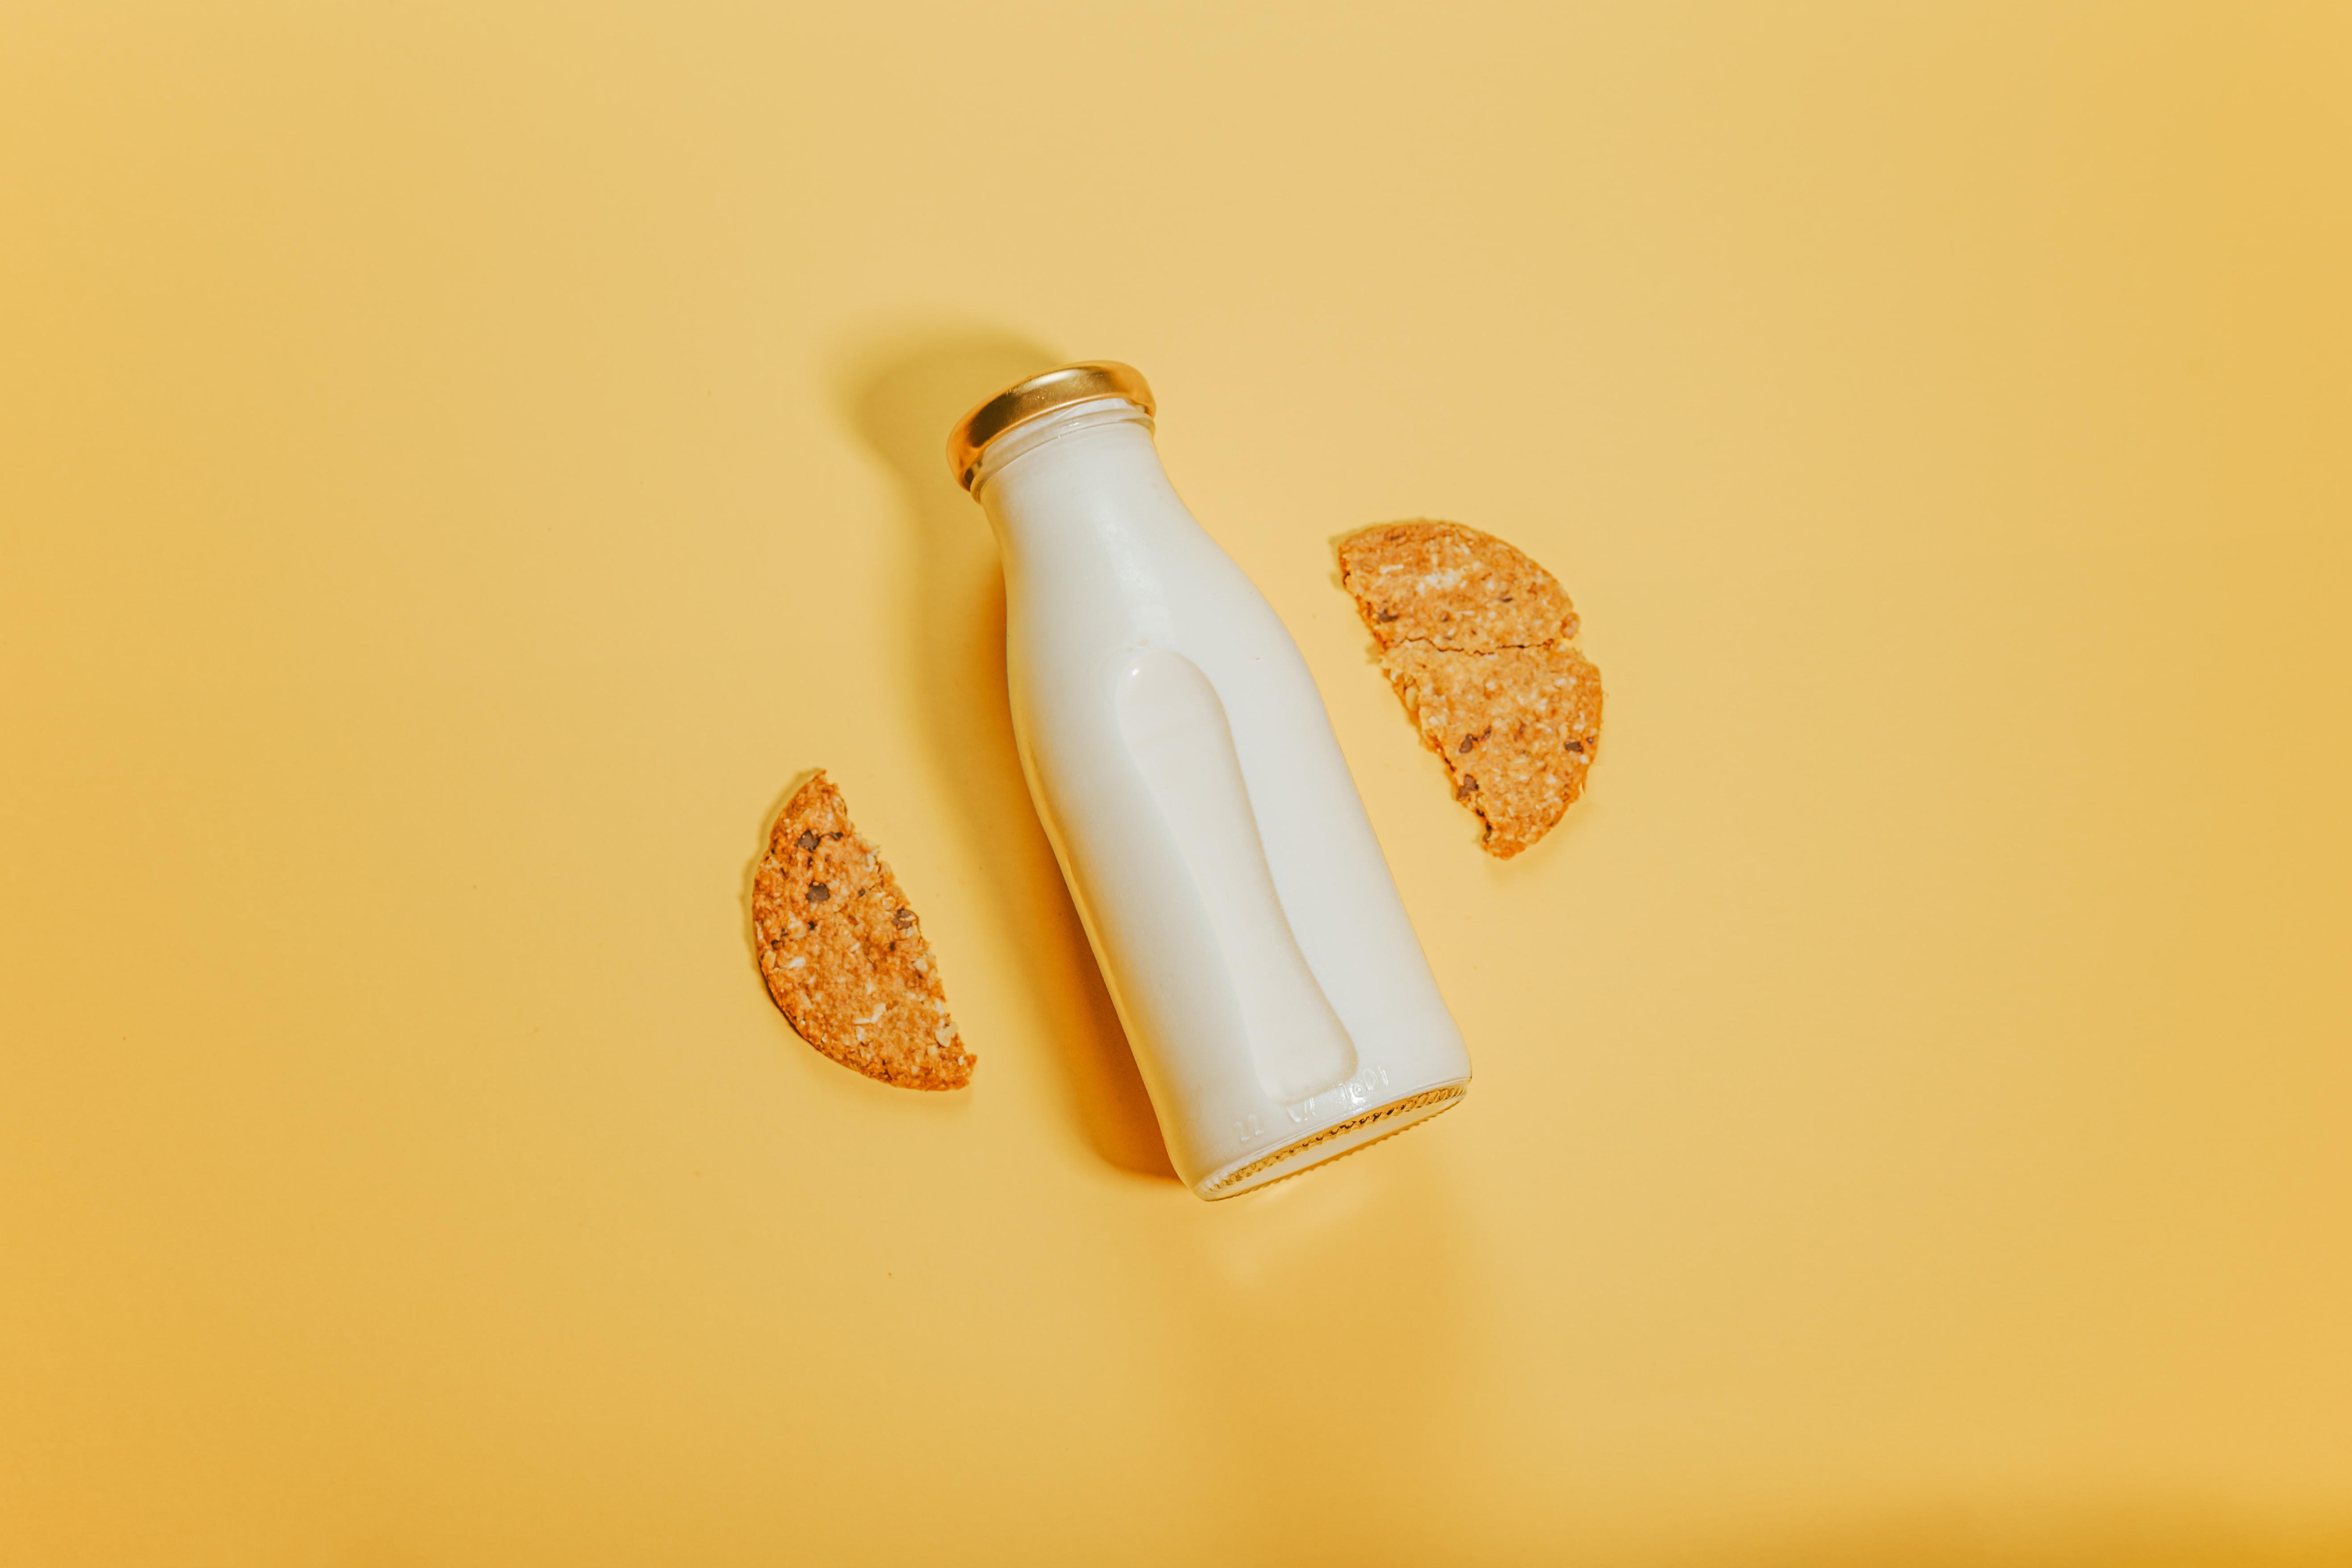 A small, glass bottle of milk against a yellow background with a cookie snapped in half